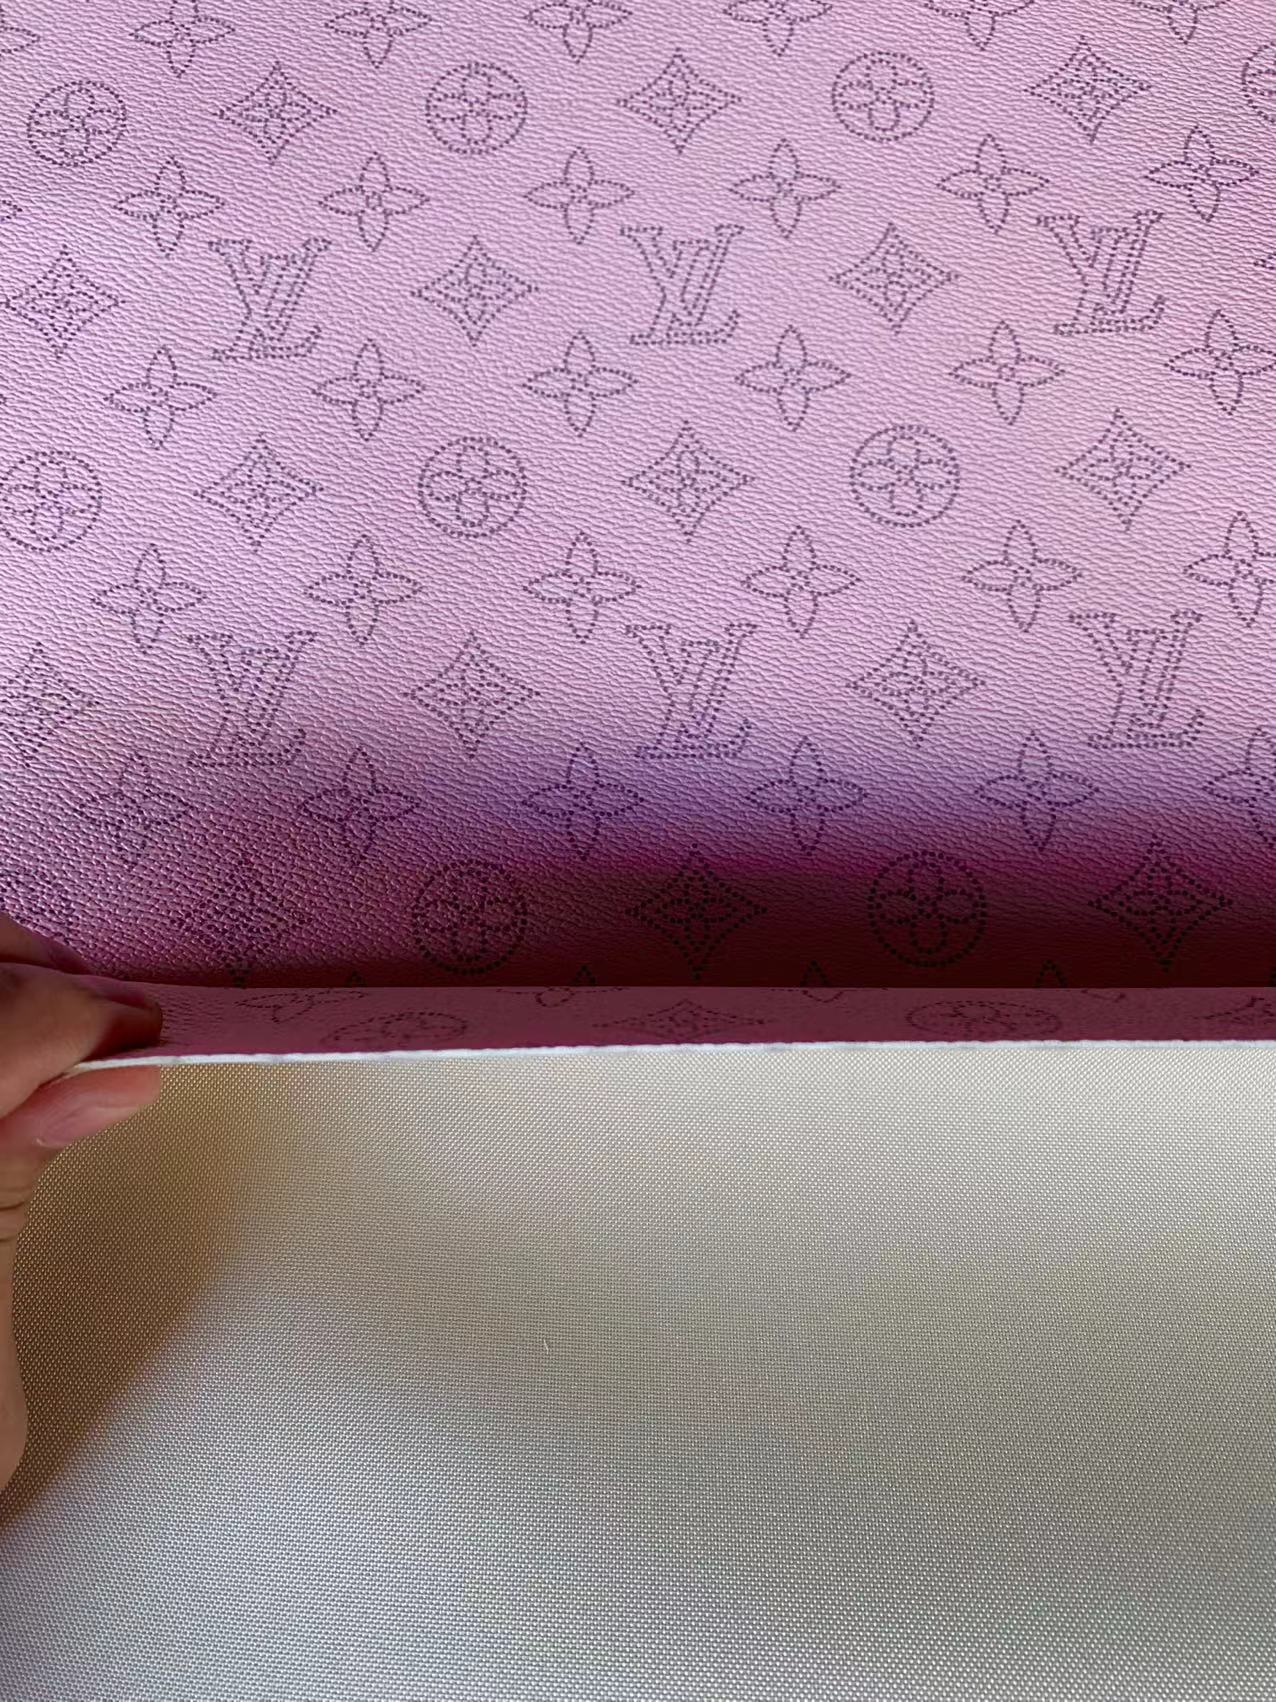 Classic Pink LV Pencils Design crafting leather fabric For